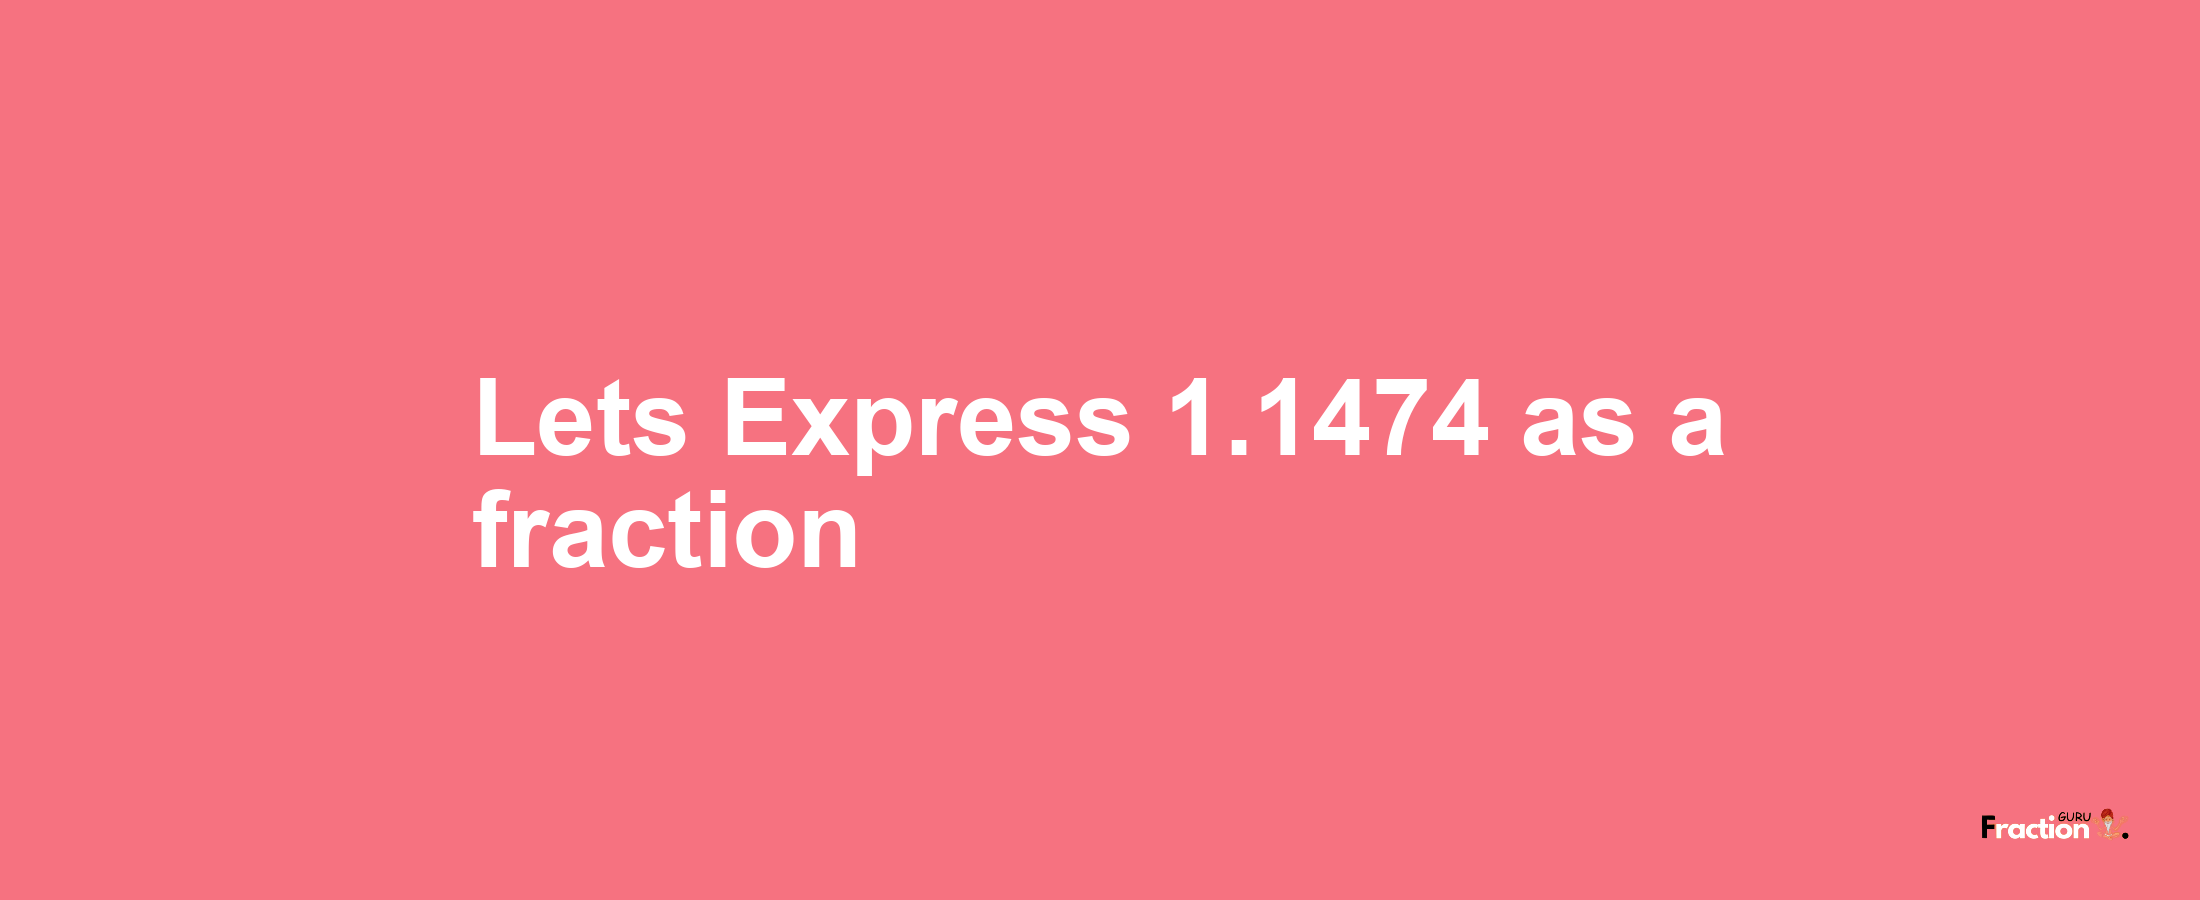 Lets Express 1.1474 as afraction